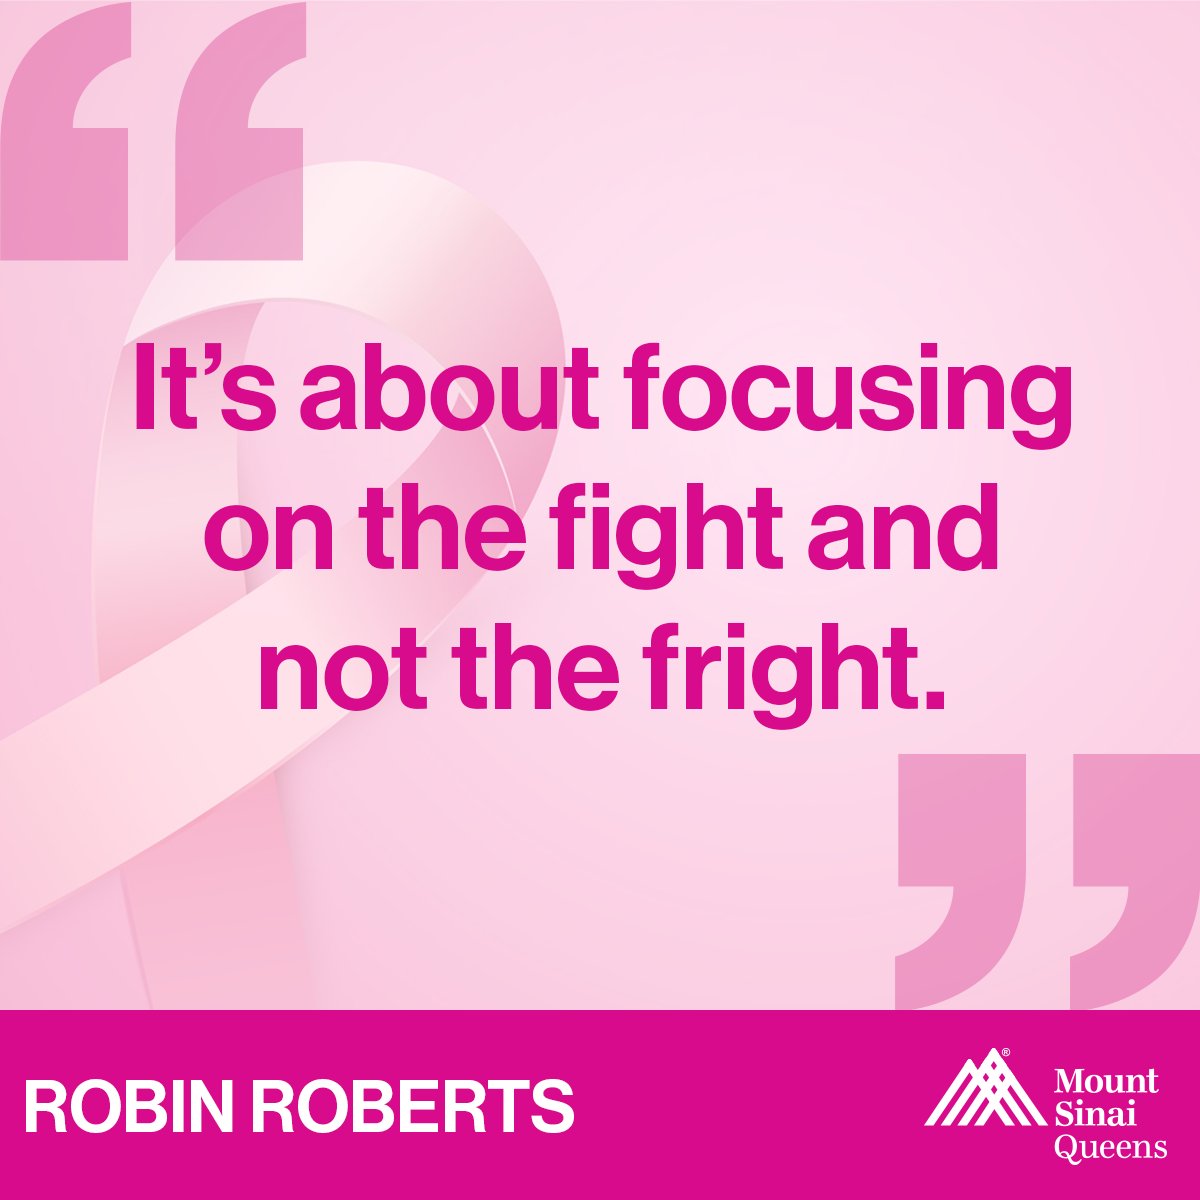 #MotivationMonday In honor of #BreastCancerAwareness Month, here are some inspirational words from Robin Roberts. To schedule a mammogram, please call Mount Sinai Queens Imaging at 718-808-7500. bit.ly/3sSNwym